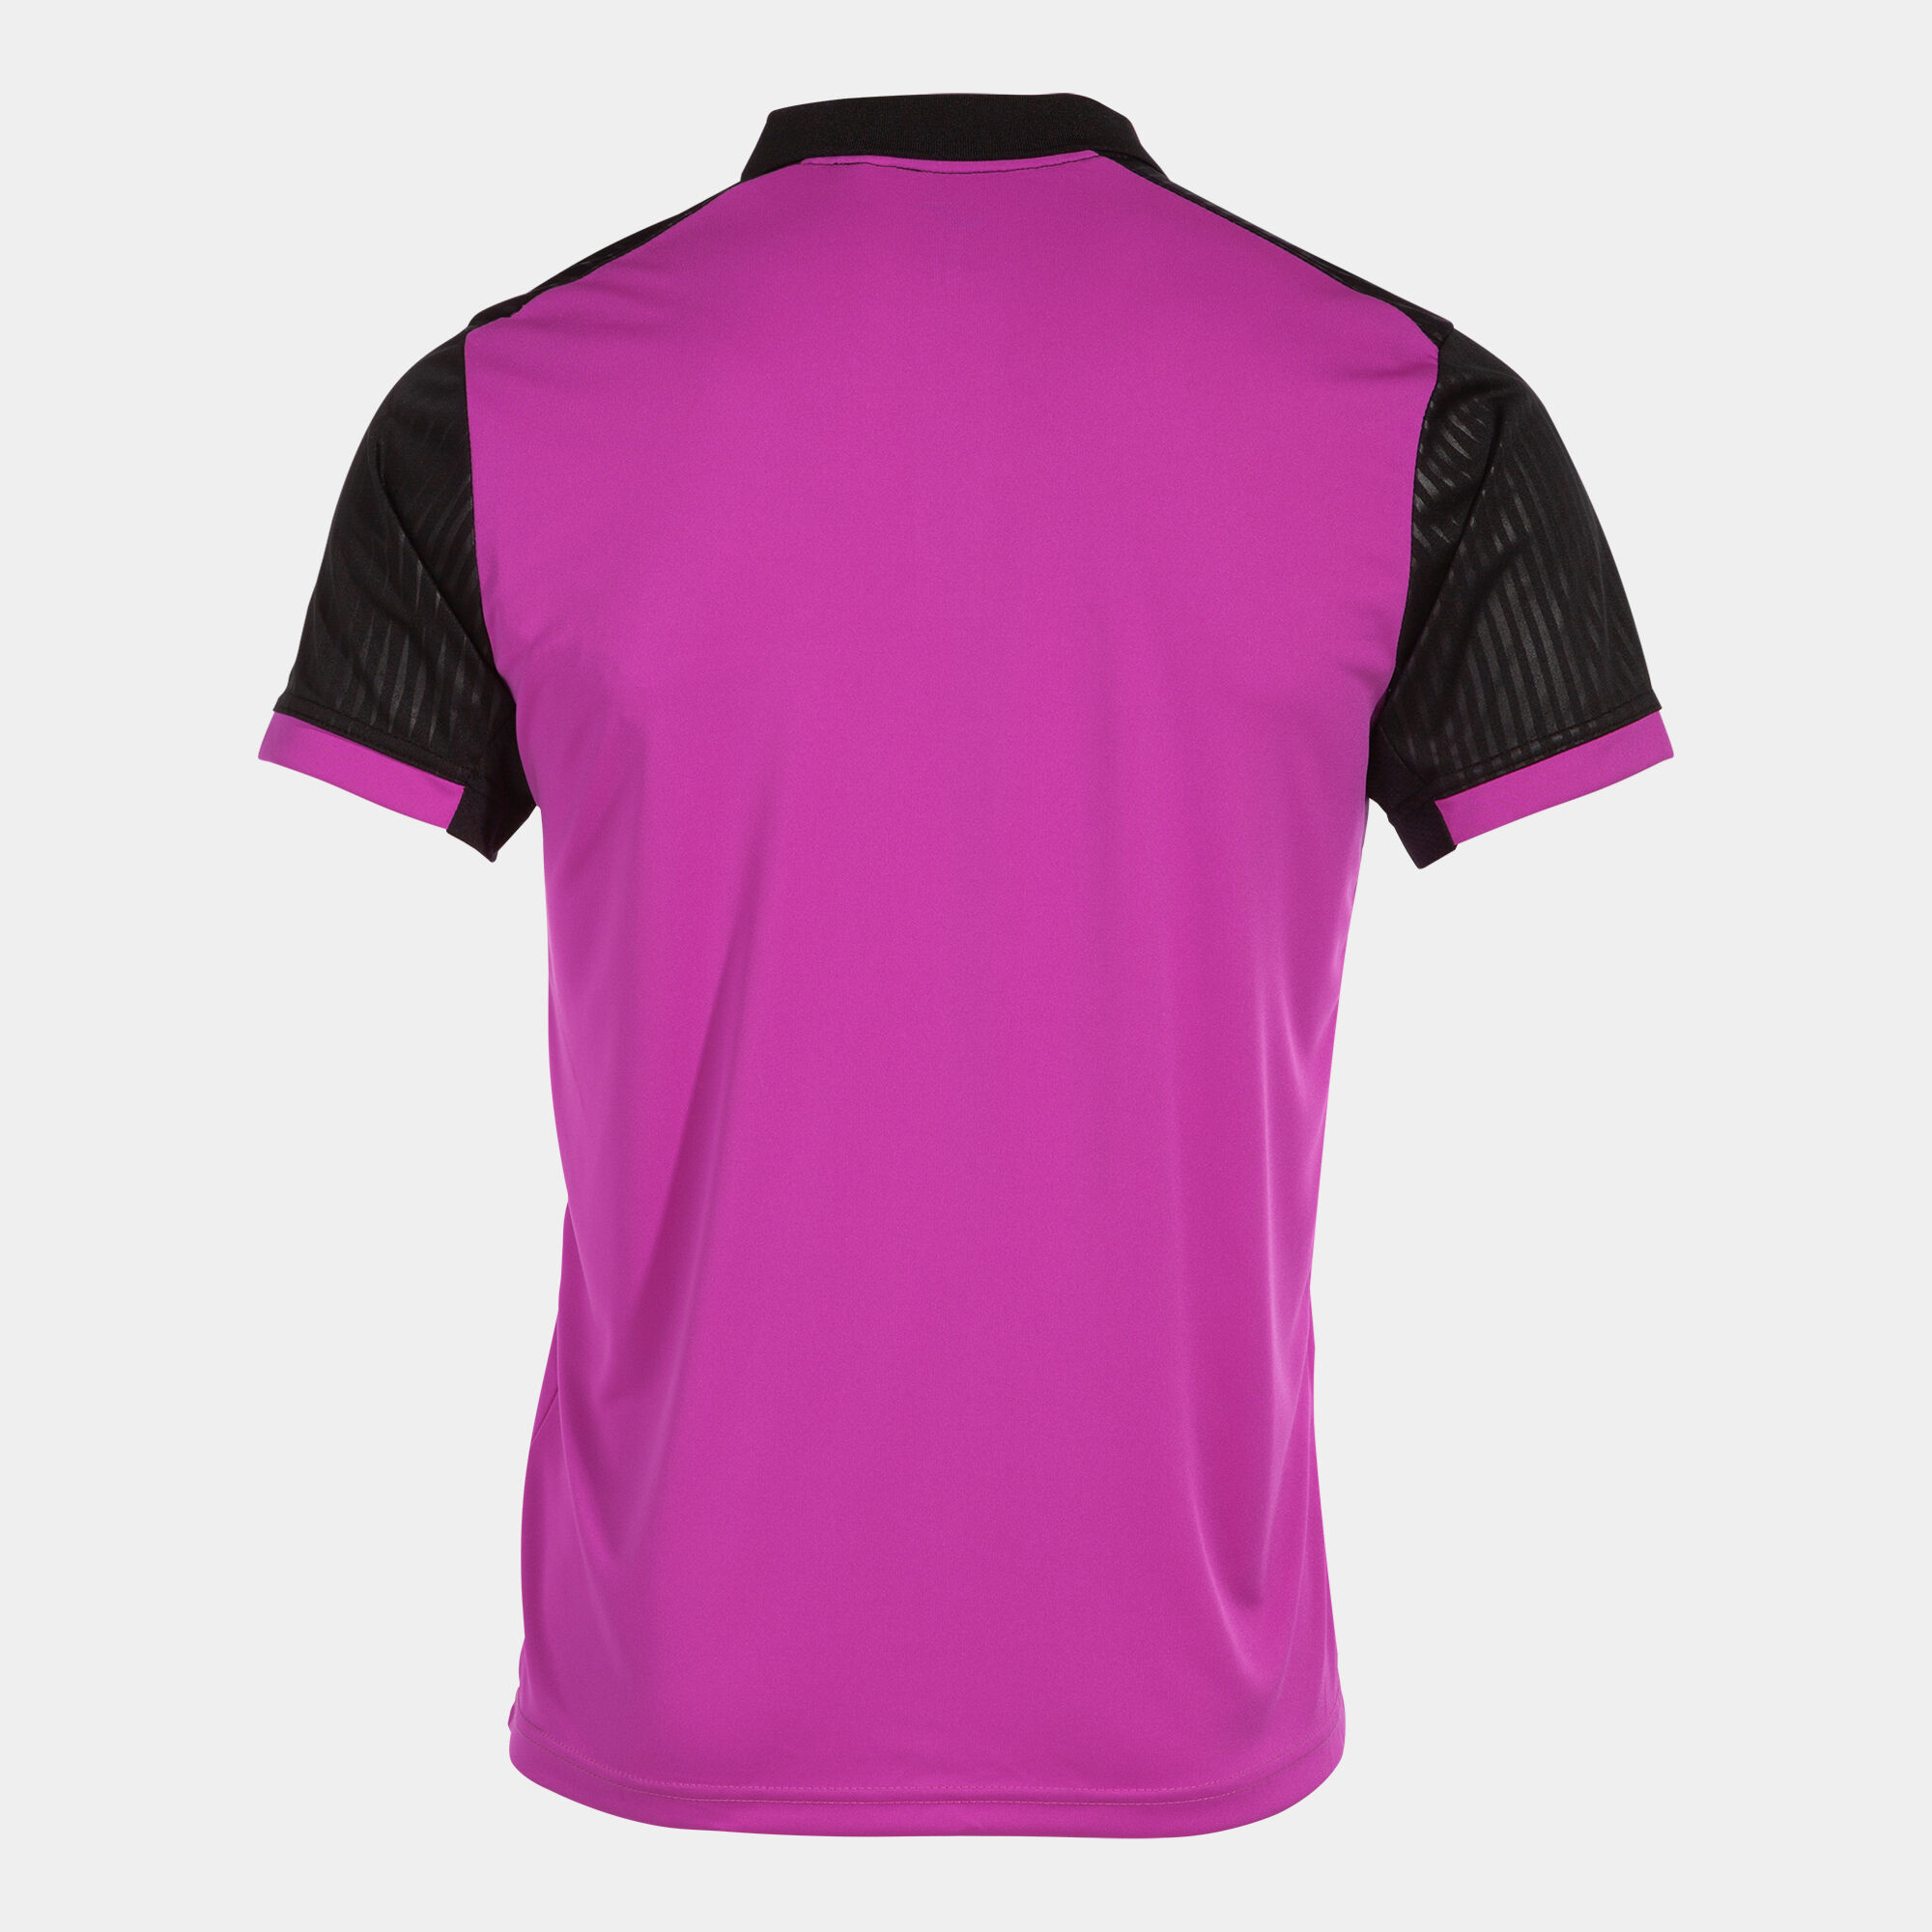 Polo manches courtes homme Montreal rose fluo noir